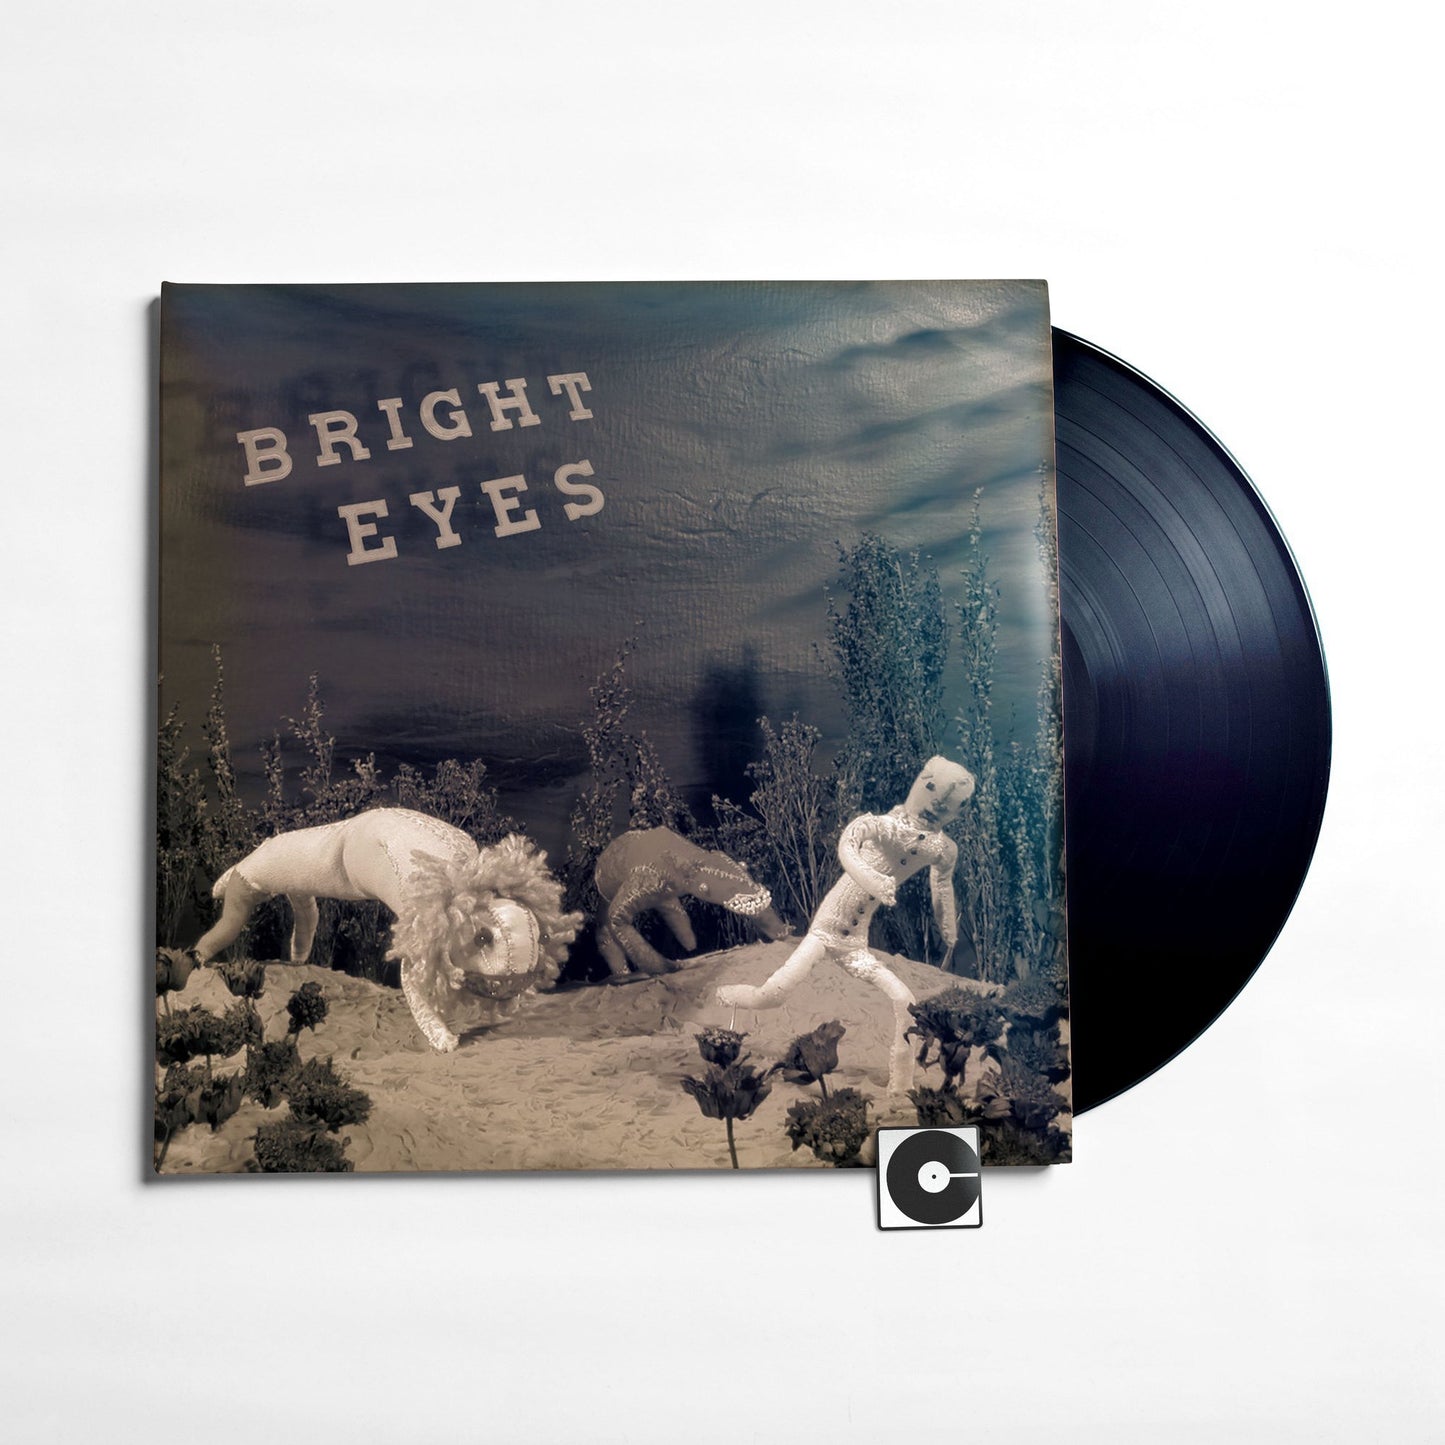 Bright Eyes - "There Is No Beginning To The Story"